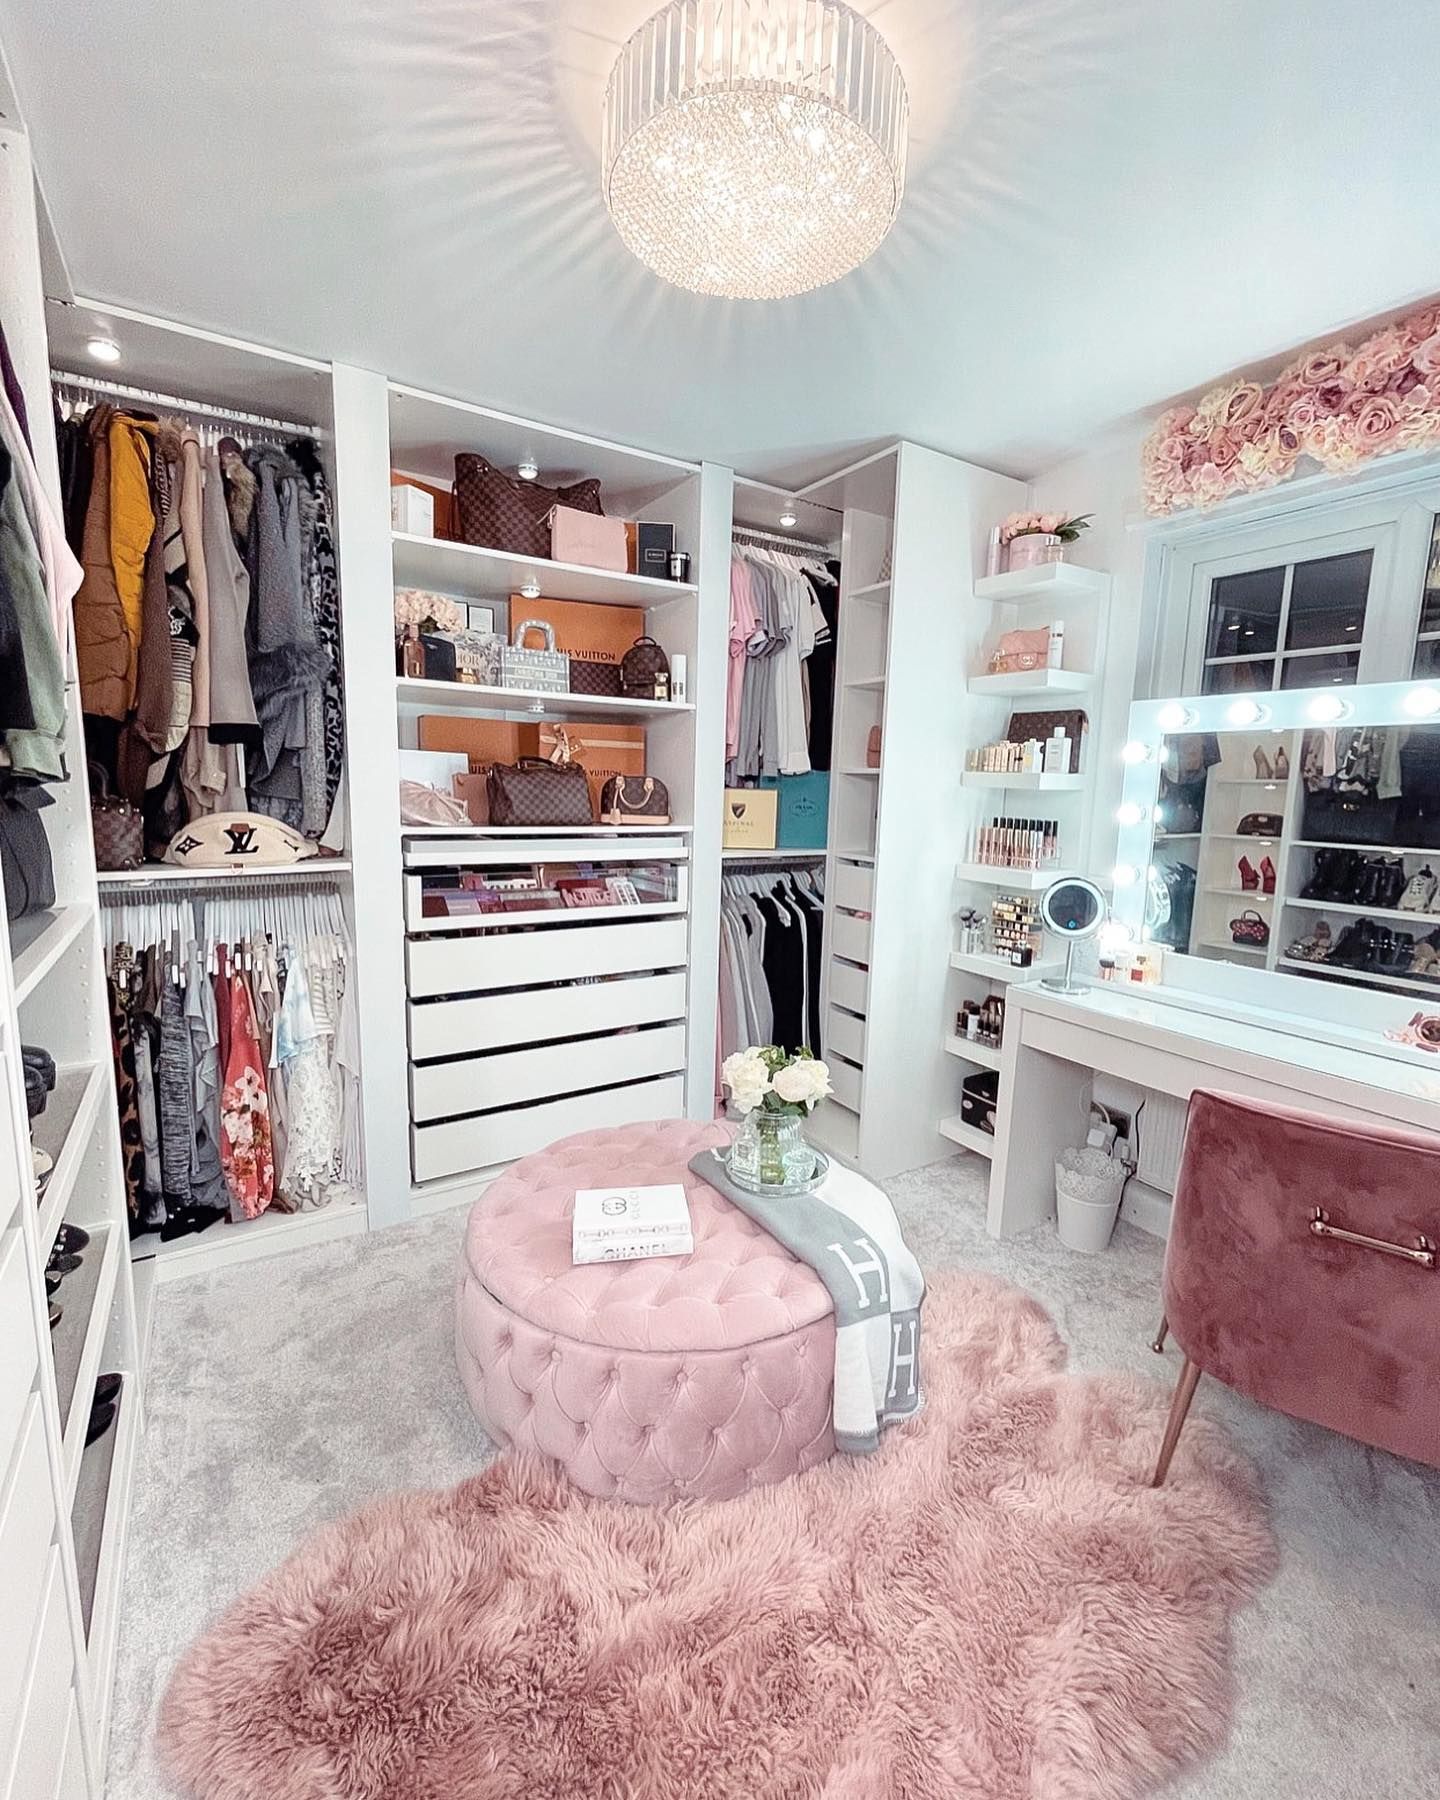 Diy Fanatics Are Transforming Ikea Units Into Stunning, Bargain Walk In  Wardrobes…with Room For Shoes, Bags And Make Up | The Us Sun In Bargain Wardrobes (View 4 of 15)